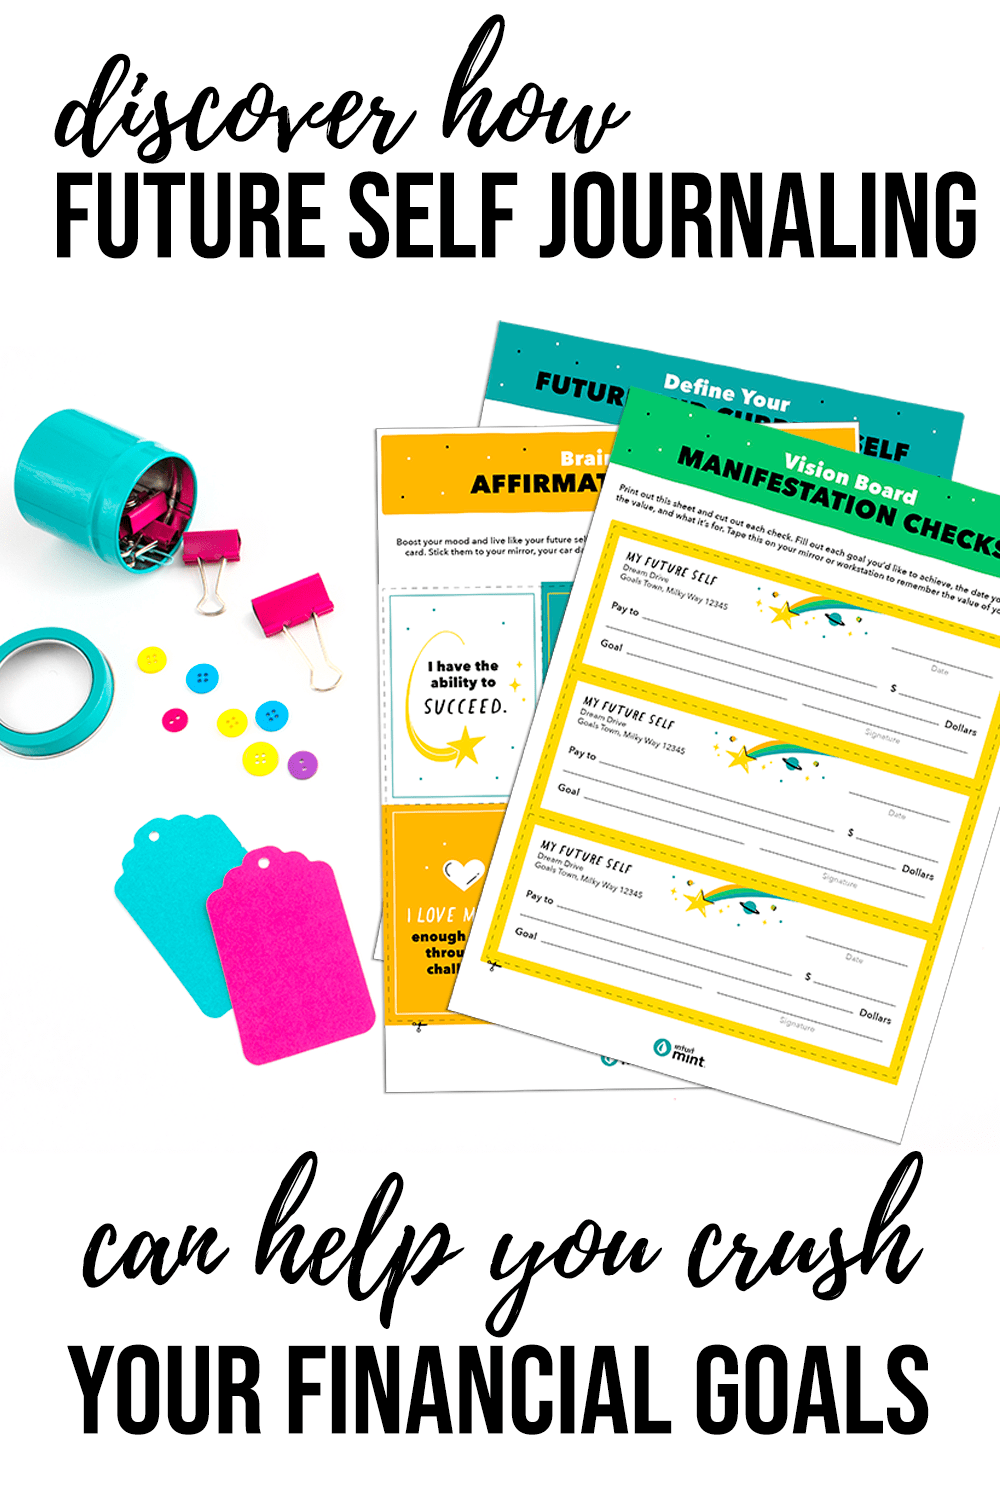 Find out how the law of attraction and future self journaling can help you to crush your financial goals (and any other goals for that matter!) Don't forget to get your free printables to help you to get started!